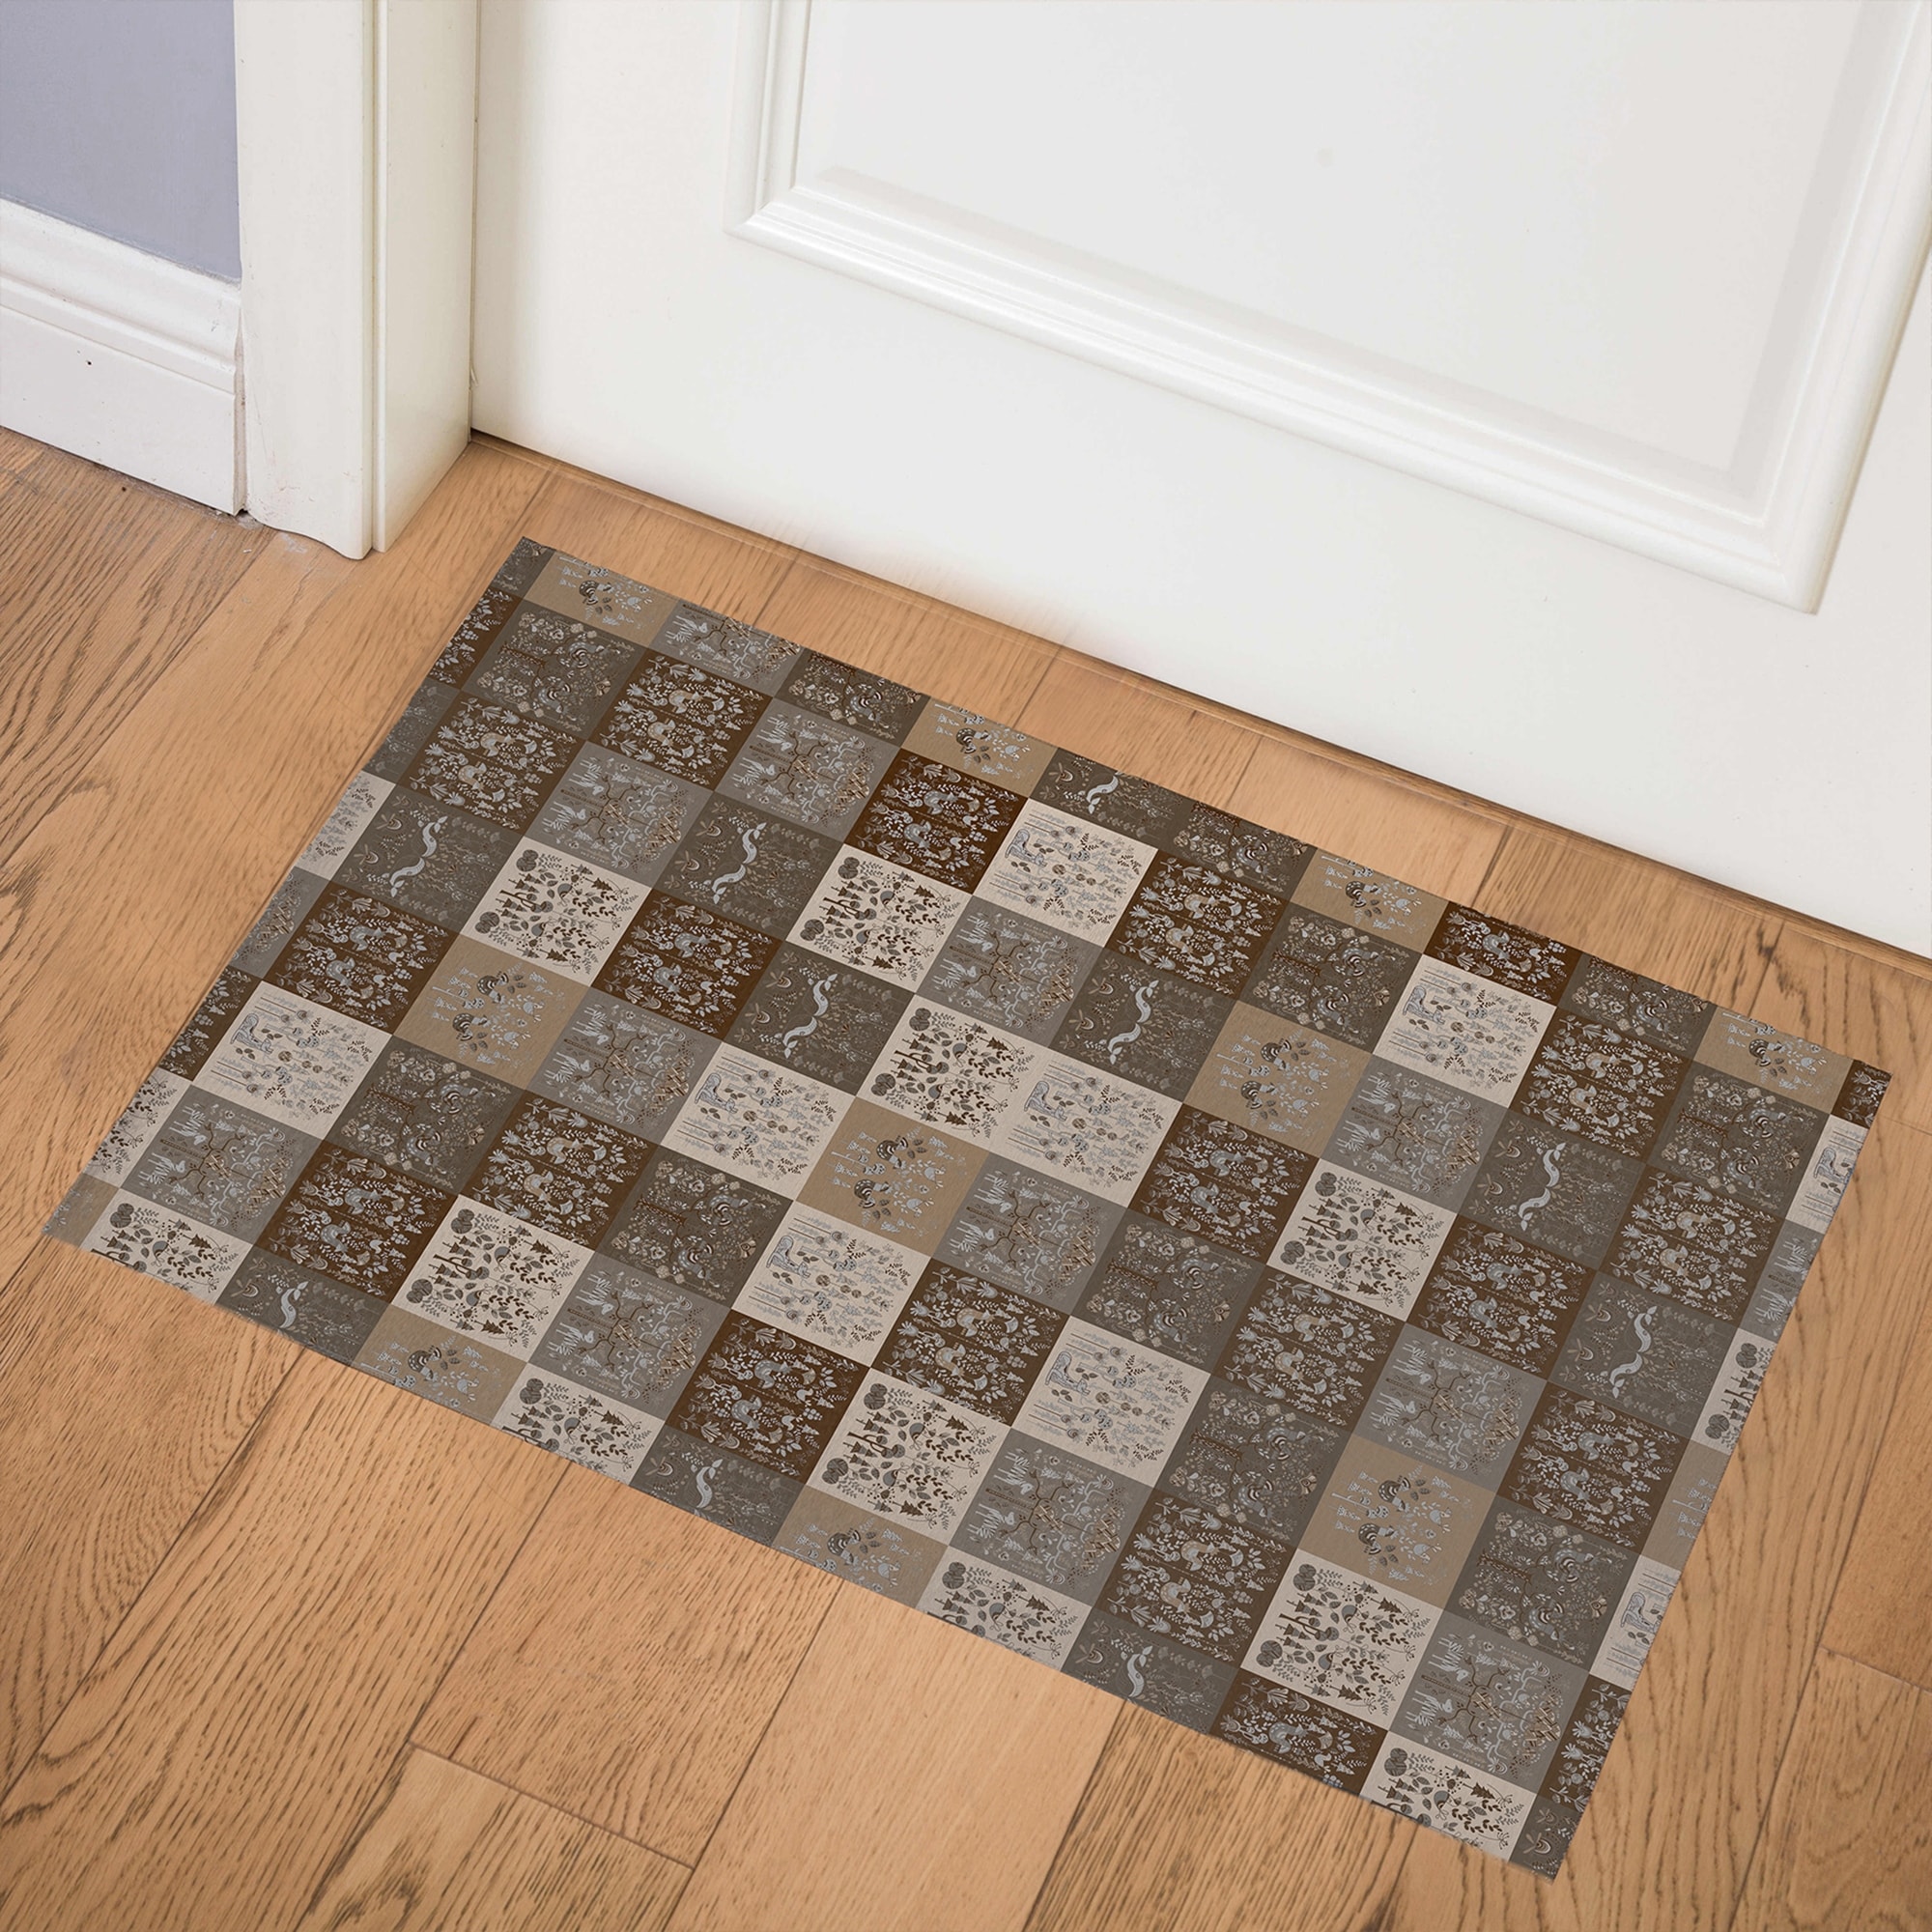 https://ak1.ostkcdn.com/images/products/is/images/direct/3464d7e0f0f6e1ec2a9ac1e314e251d1529c3575/SCANDINAVIAN-PATCHWORK-NEUTRAL-Indoor-Floor-Mat-By-Kavka-Designs.jpg